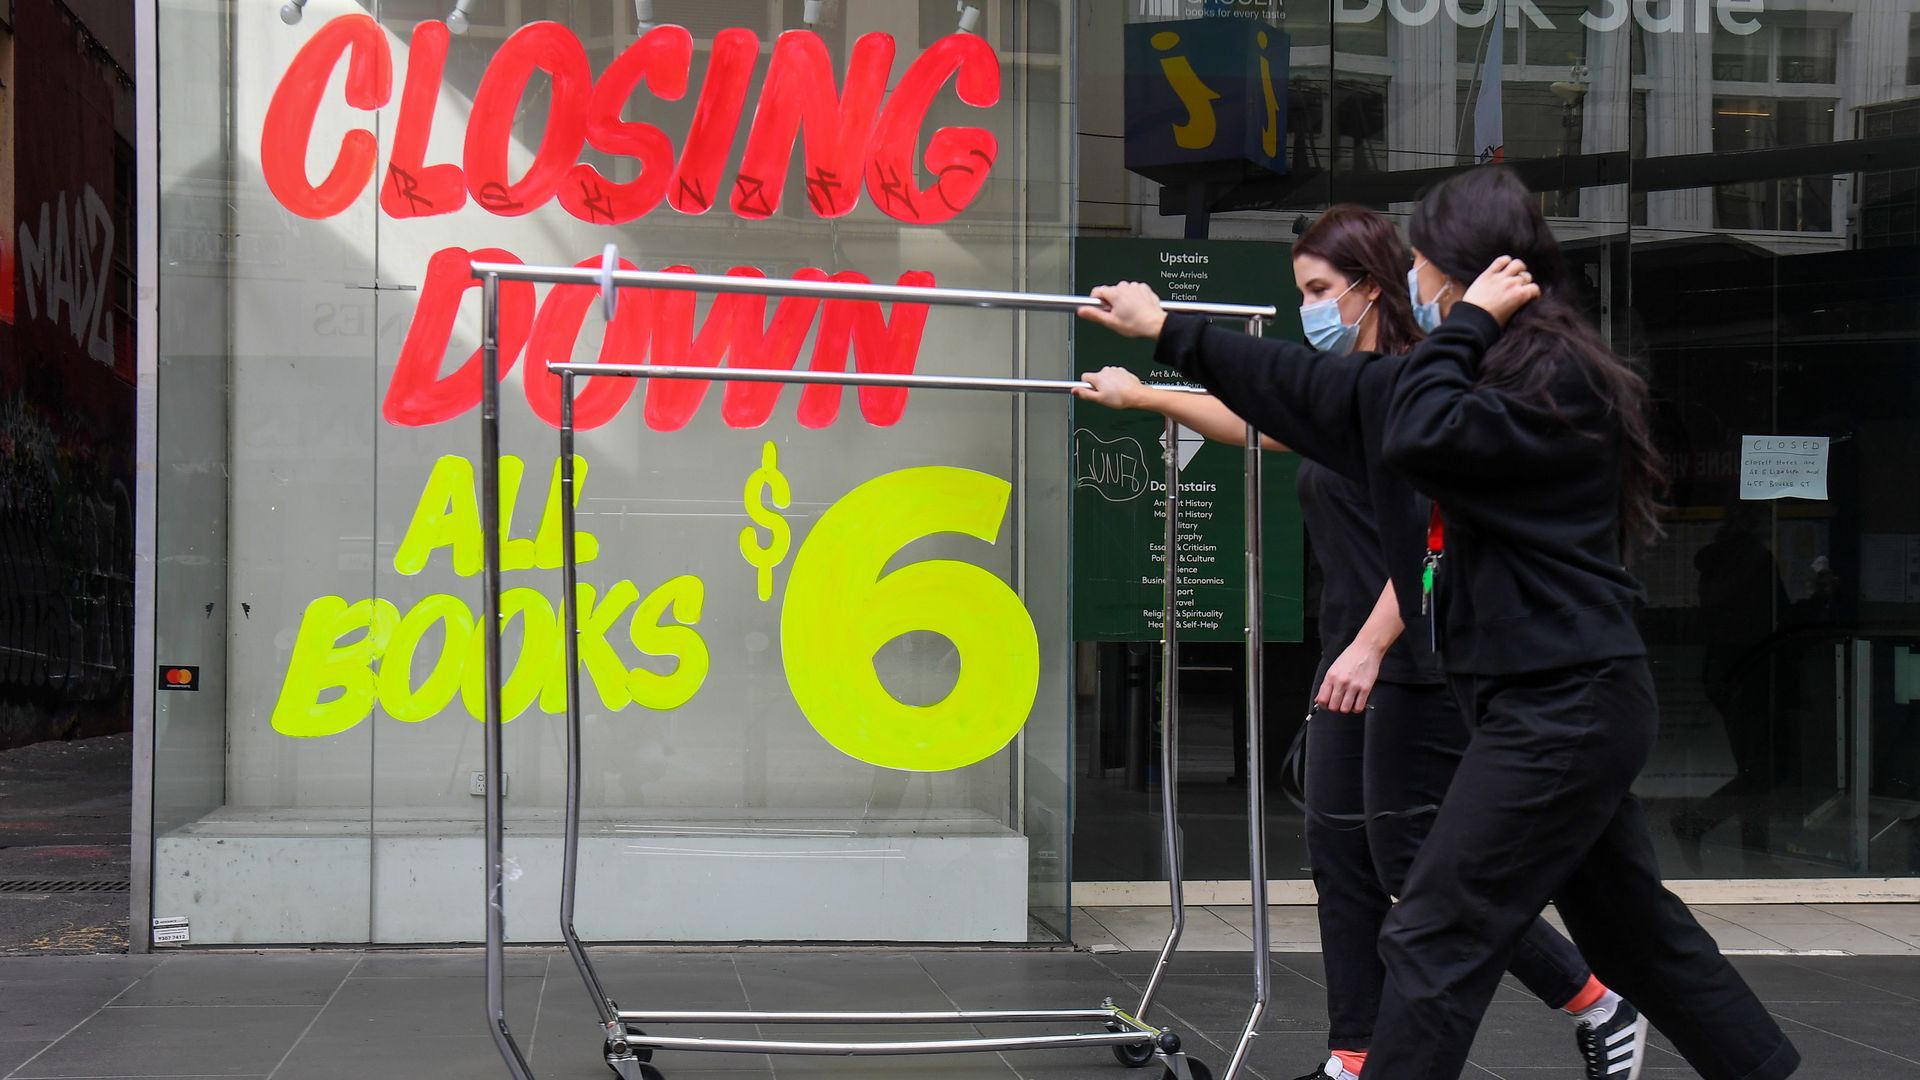 Workers push trolleys past an empty shop in Melbournes central business district on August 3